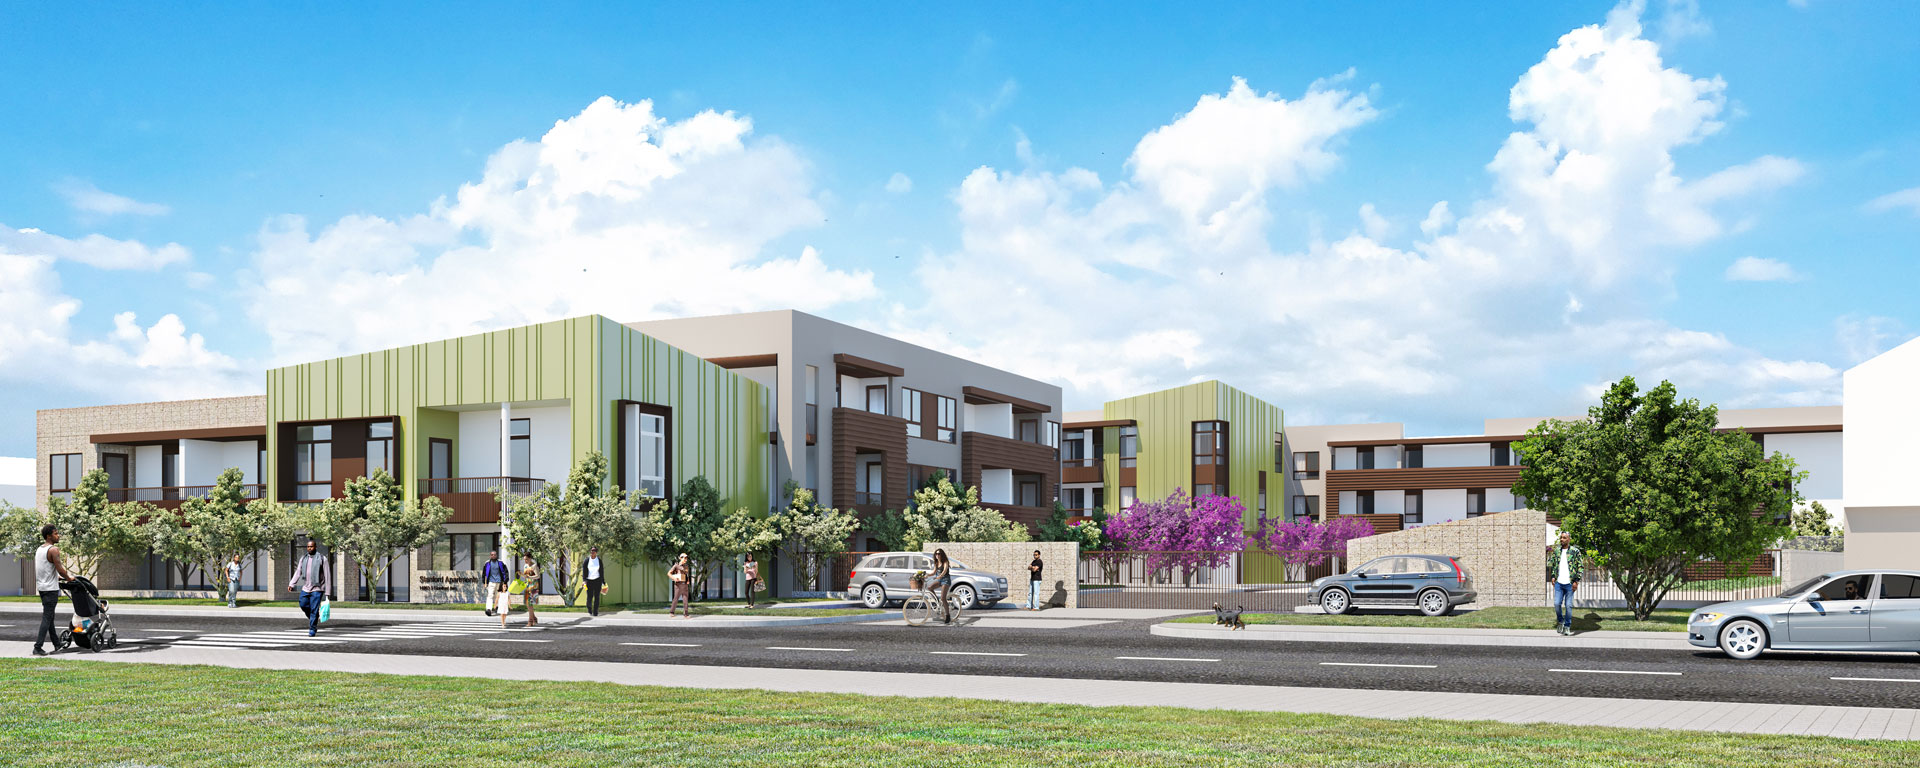 85 Unit Affordable Housing Development To Break Ground In West